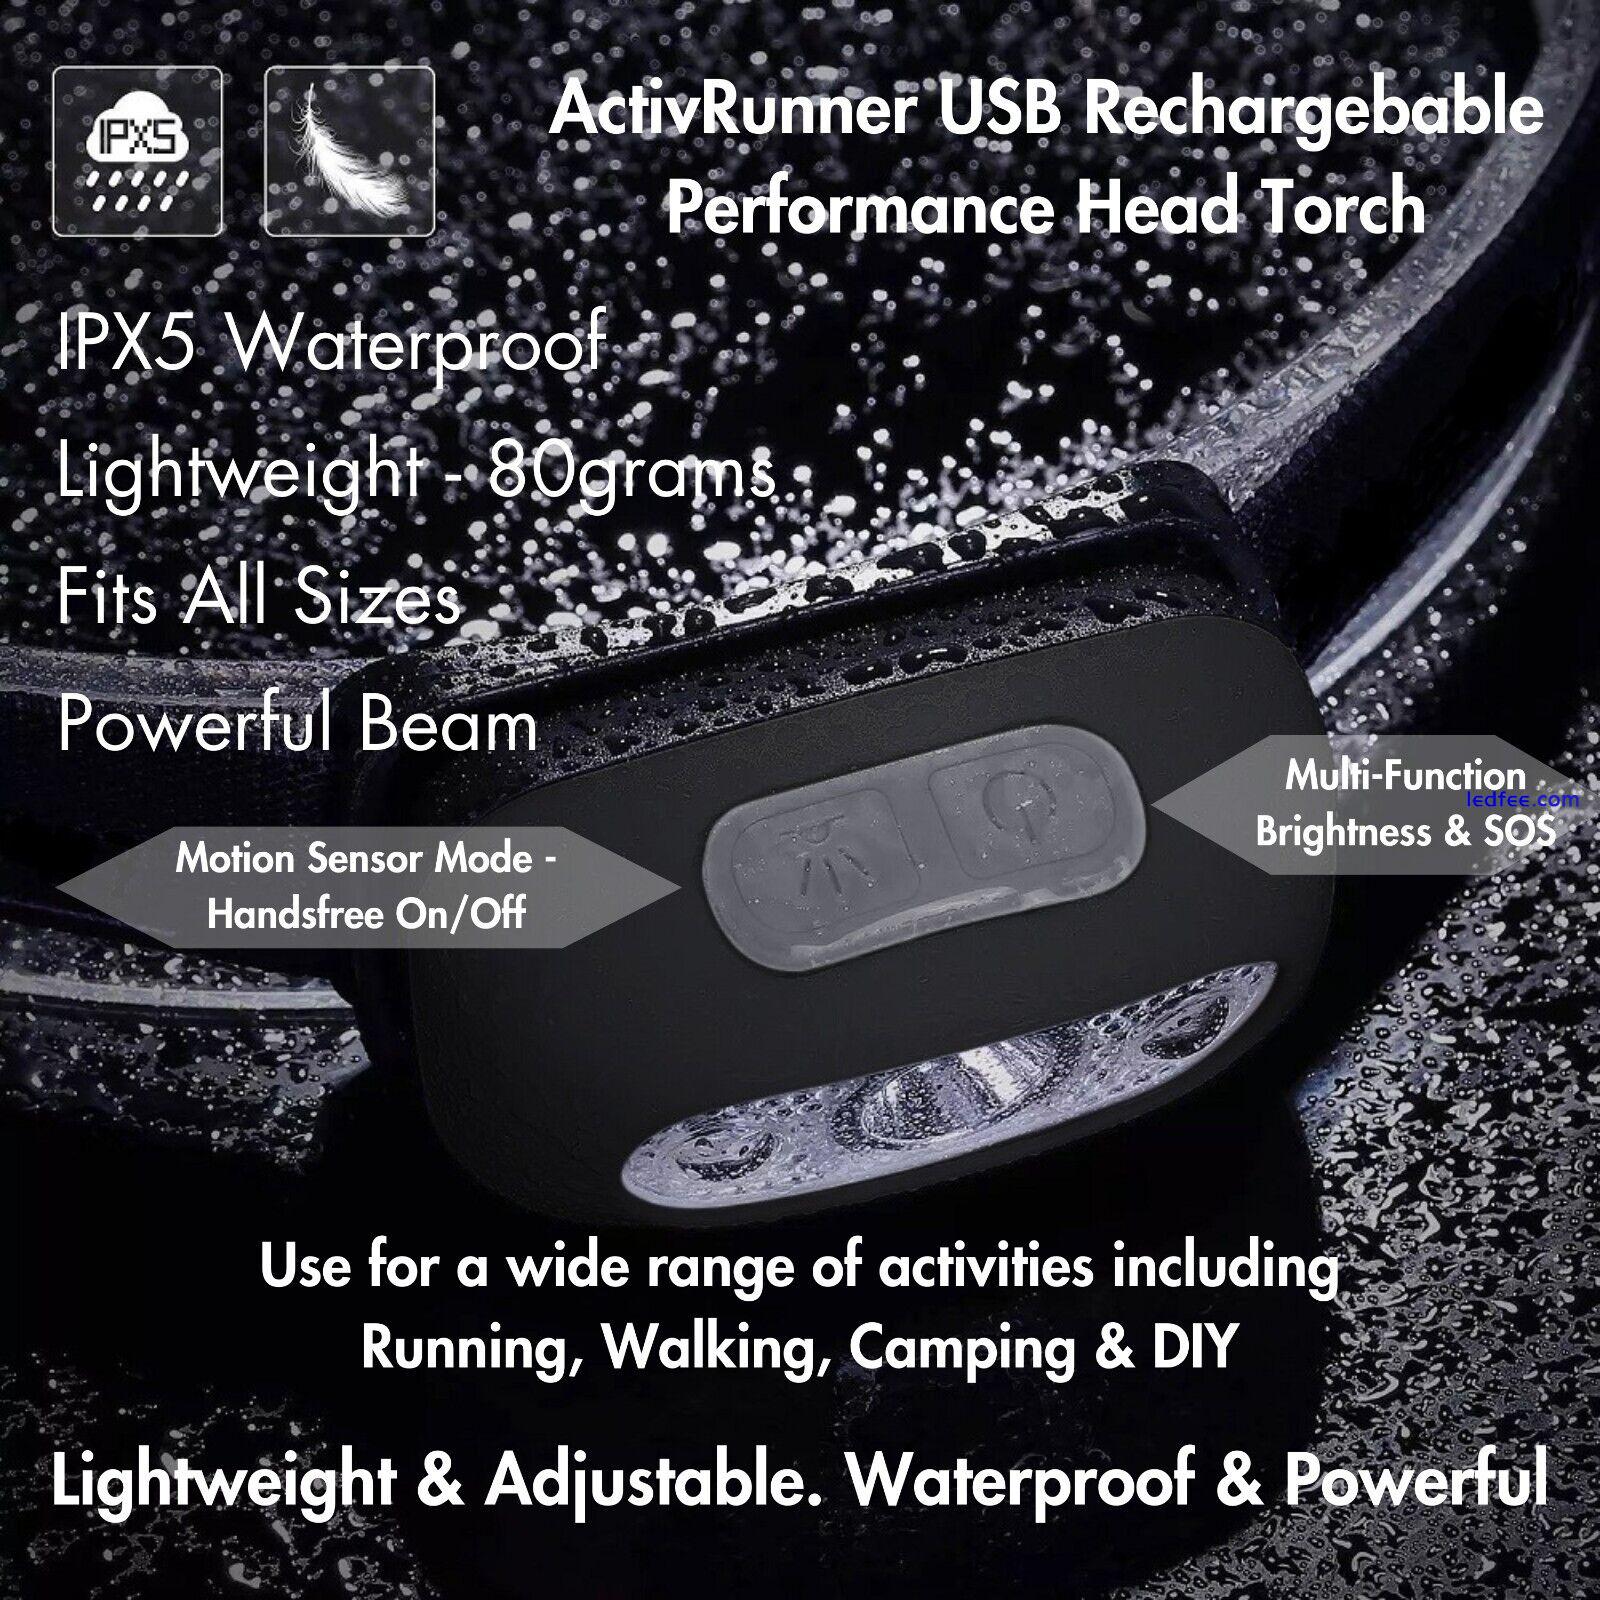 ActivRunner USB Rechargeable Head Torch - ideal for Running, Hiking, Camping 0 